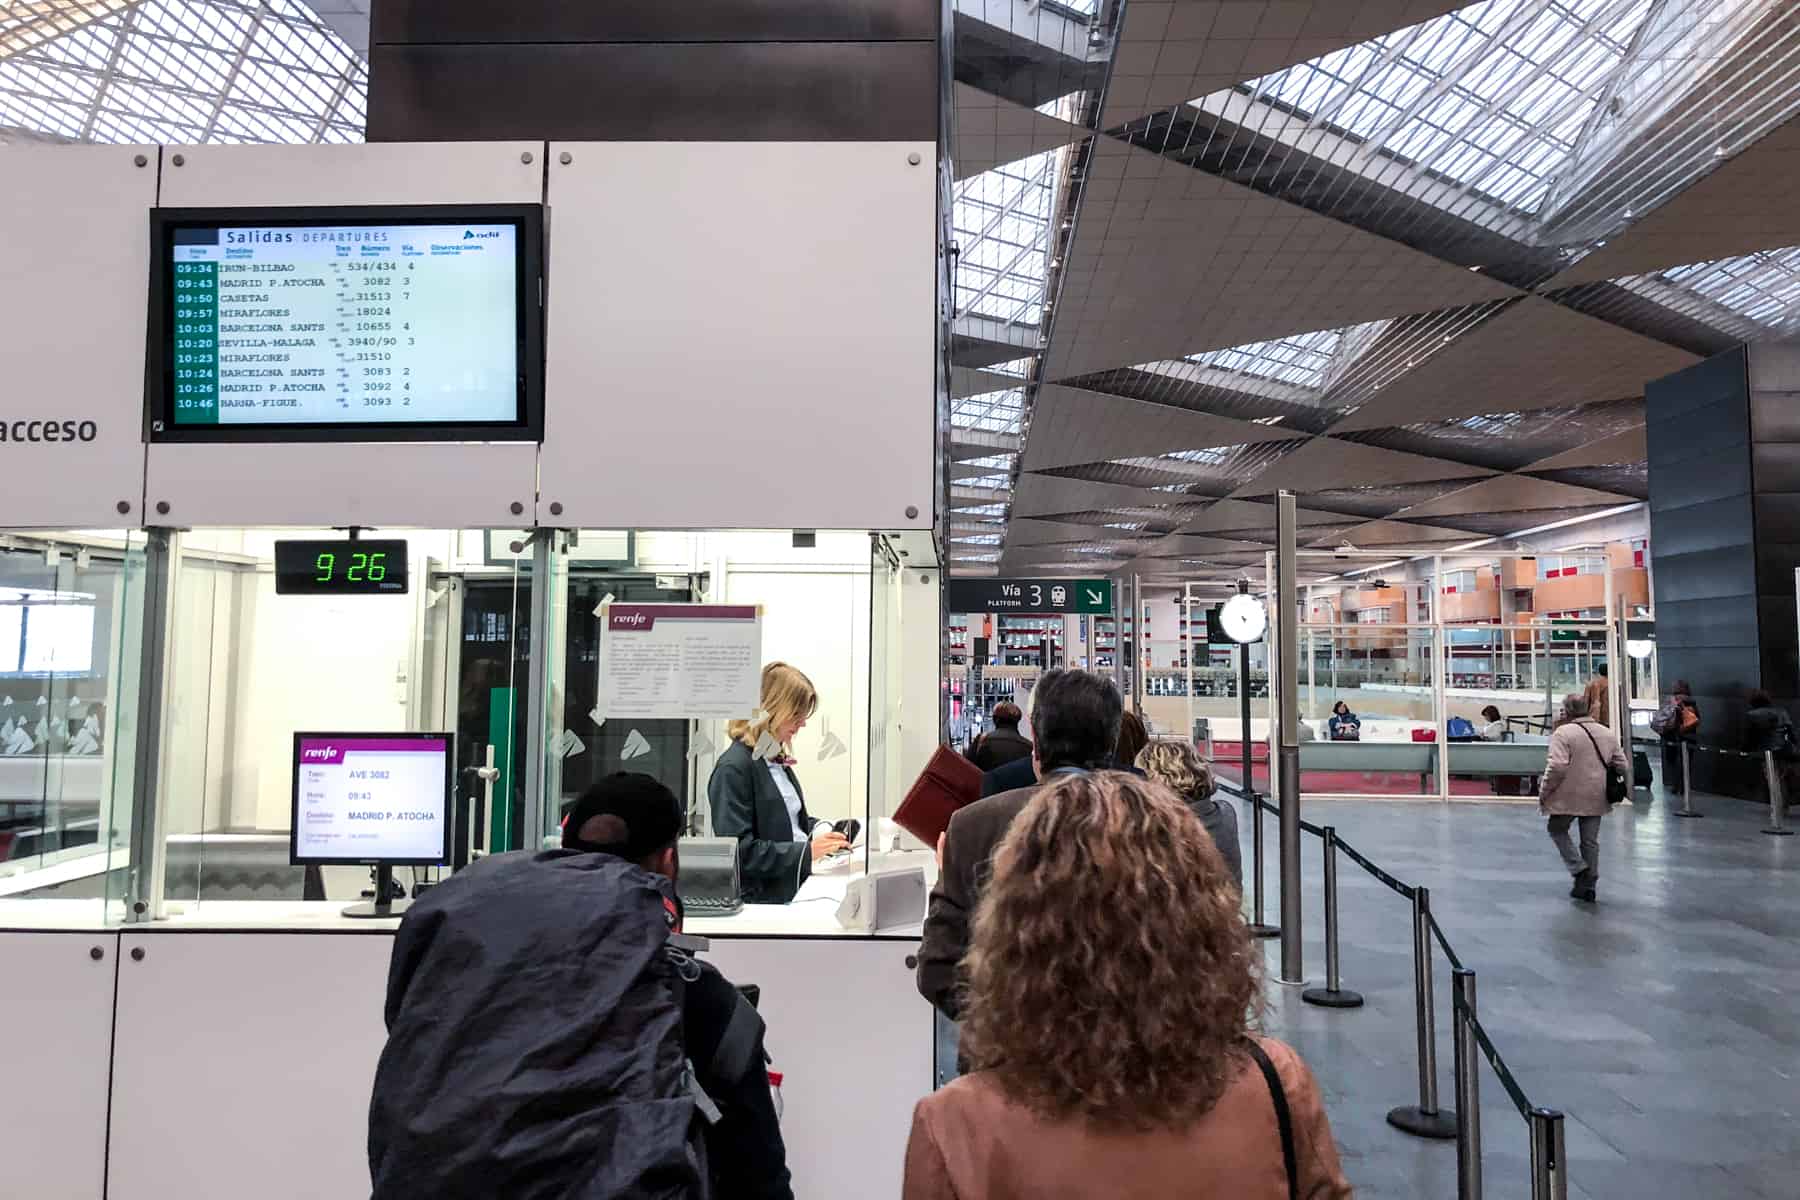 People queue up at a white ticket counter at a train station in Spain. 